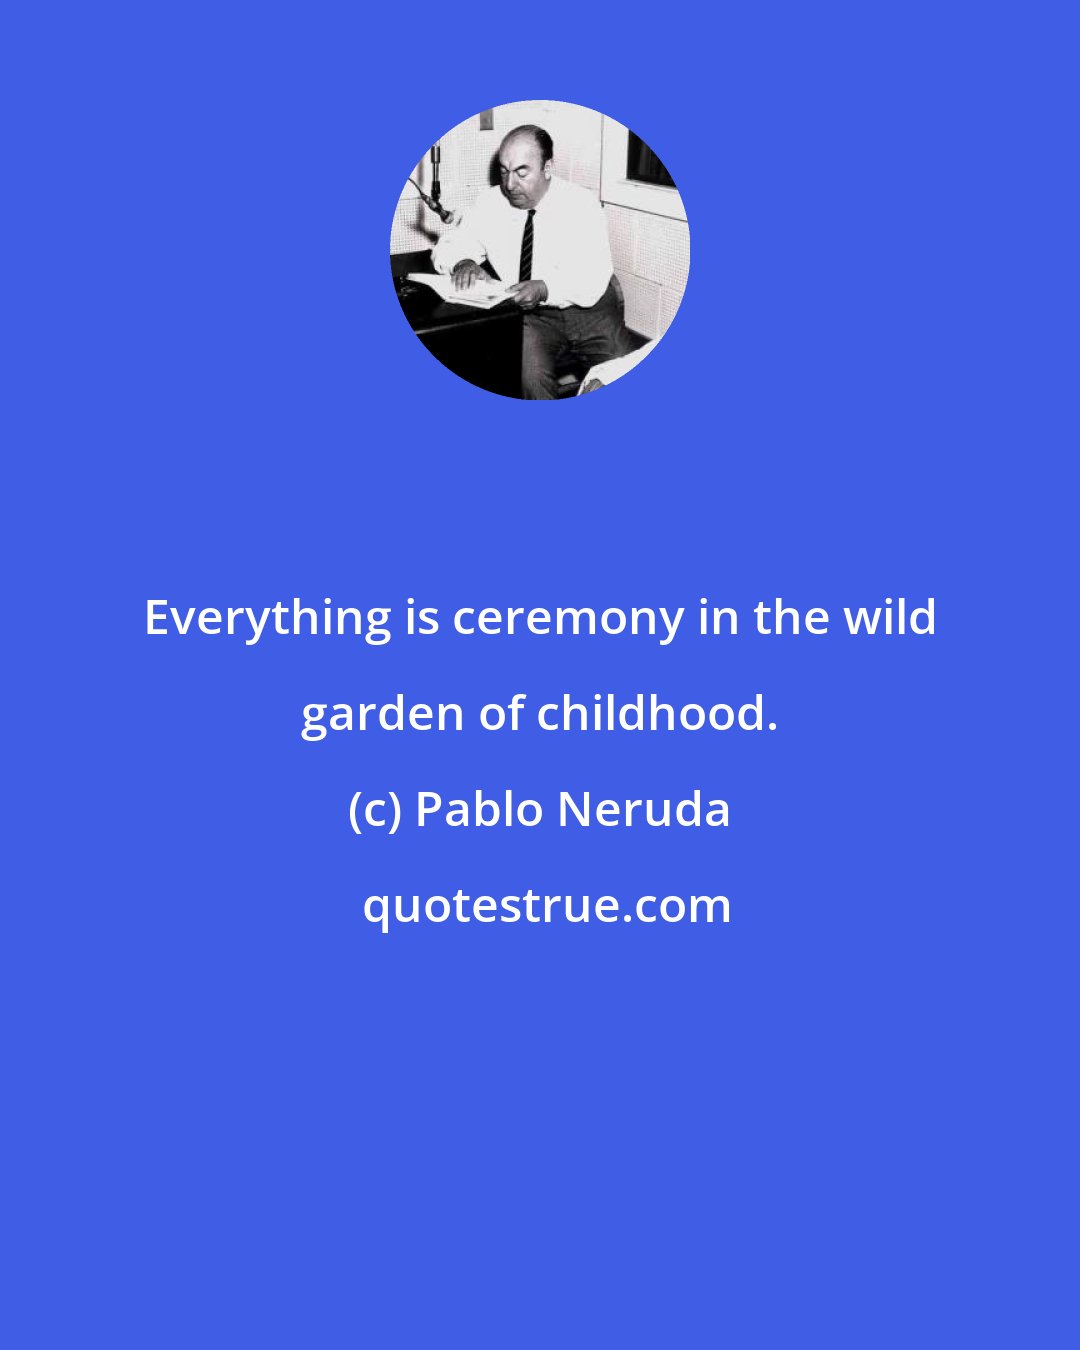 Pablo Neruda: Everything is ceremony in the wild garden of childhood.